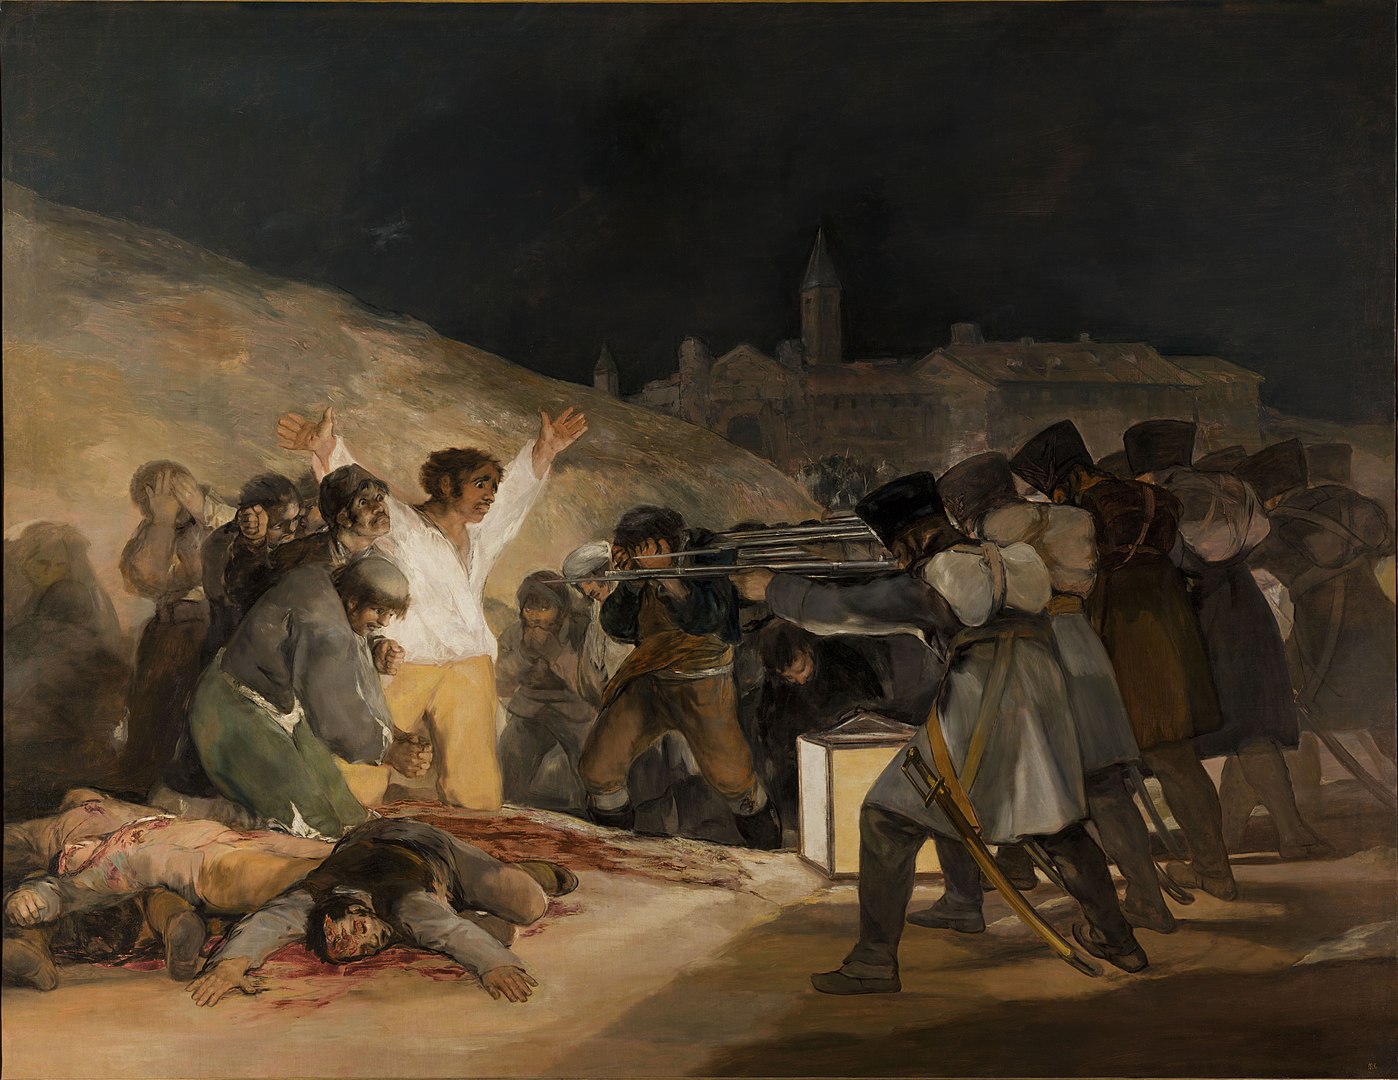 A graphic painting depicts soldiers executing unarmed men at night. One man in a white shirt, with outstretched arms, stands out, while others cower or lie dead around him. A church is visible in the background.